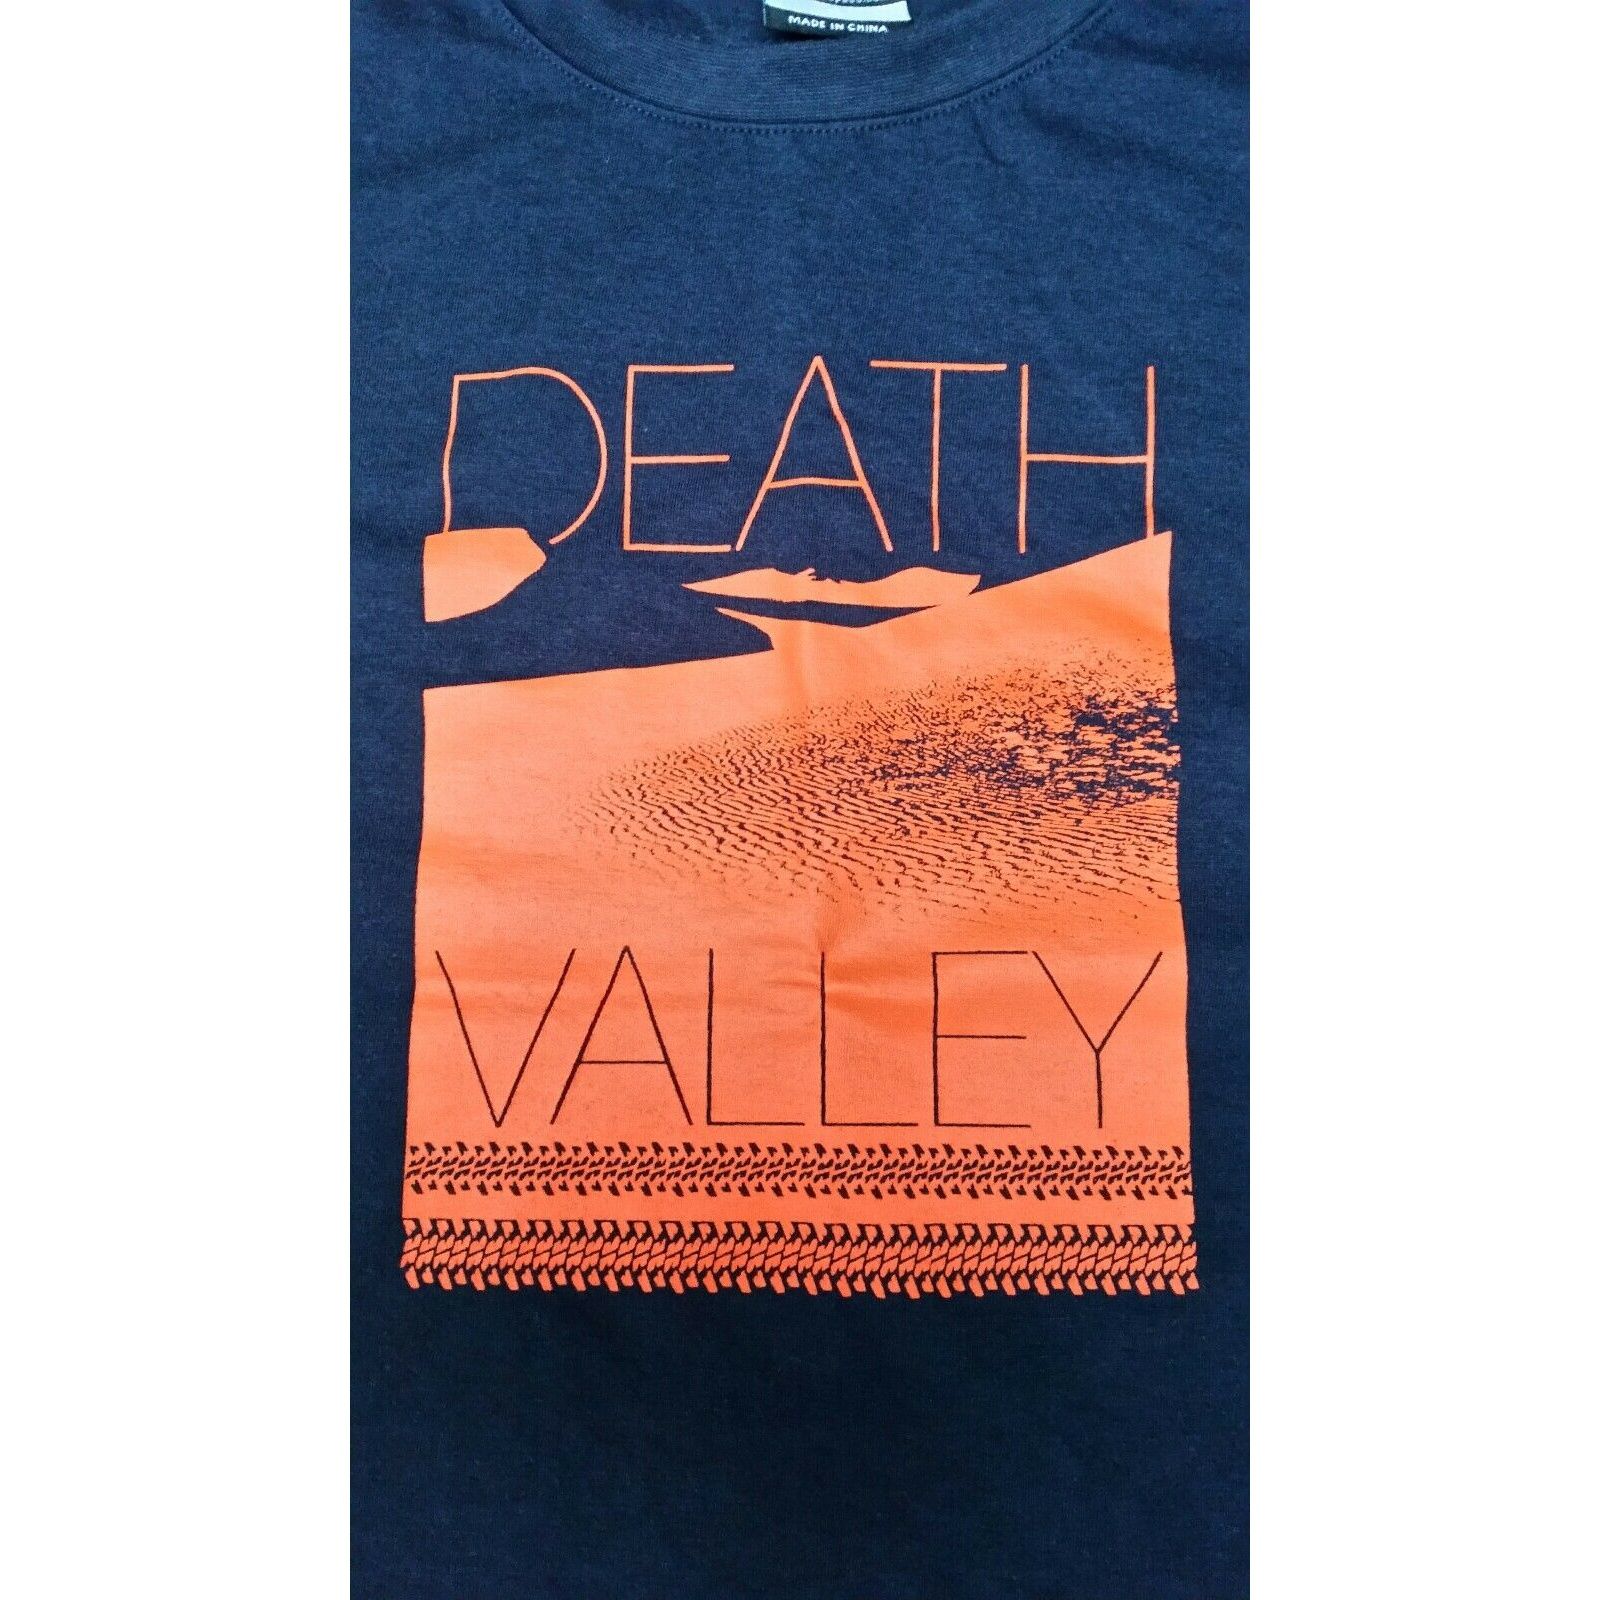 Round neck. Print on chest. 65% Polyester/35% Cotton. Trespass Mens Chest Sizing (approx): S - 35-37in/89-94cm, M - 38-40in/96.5-101.5cm, L - 41-43in/104-109cm, XL - 44-46in/111.5-117cm, XXL - 46-48in/117-122cm, 3XL - 48-50in/122-127cm.